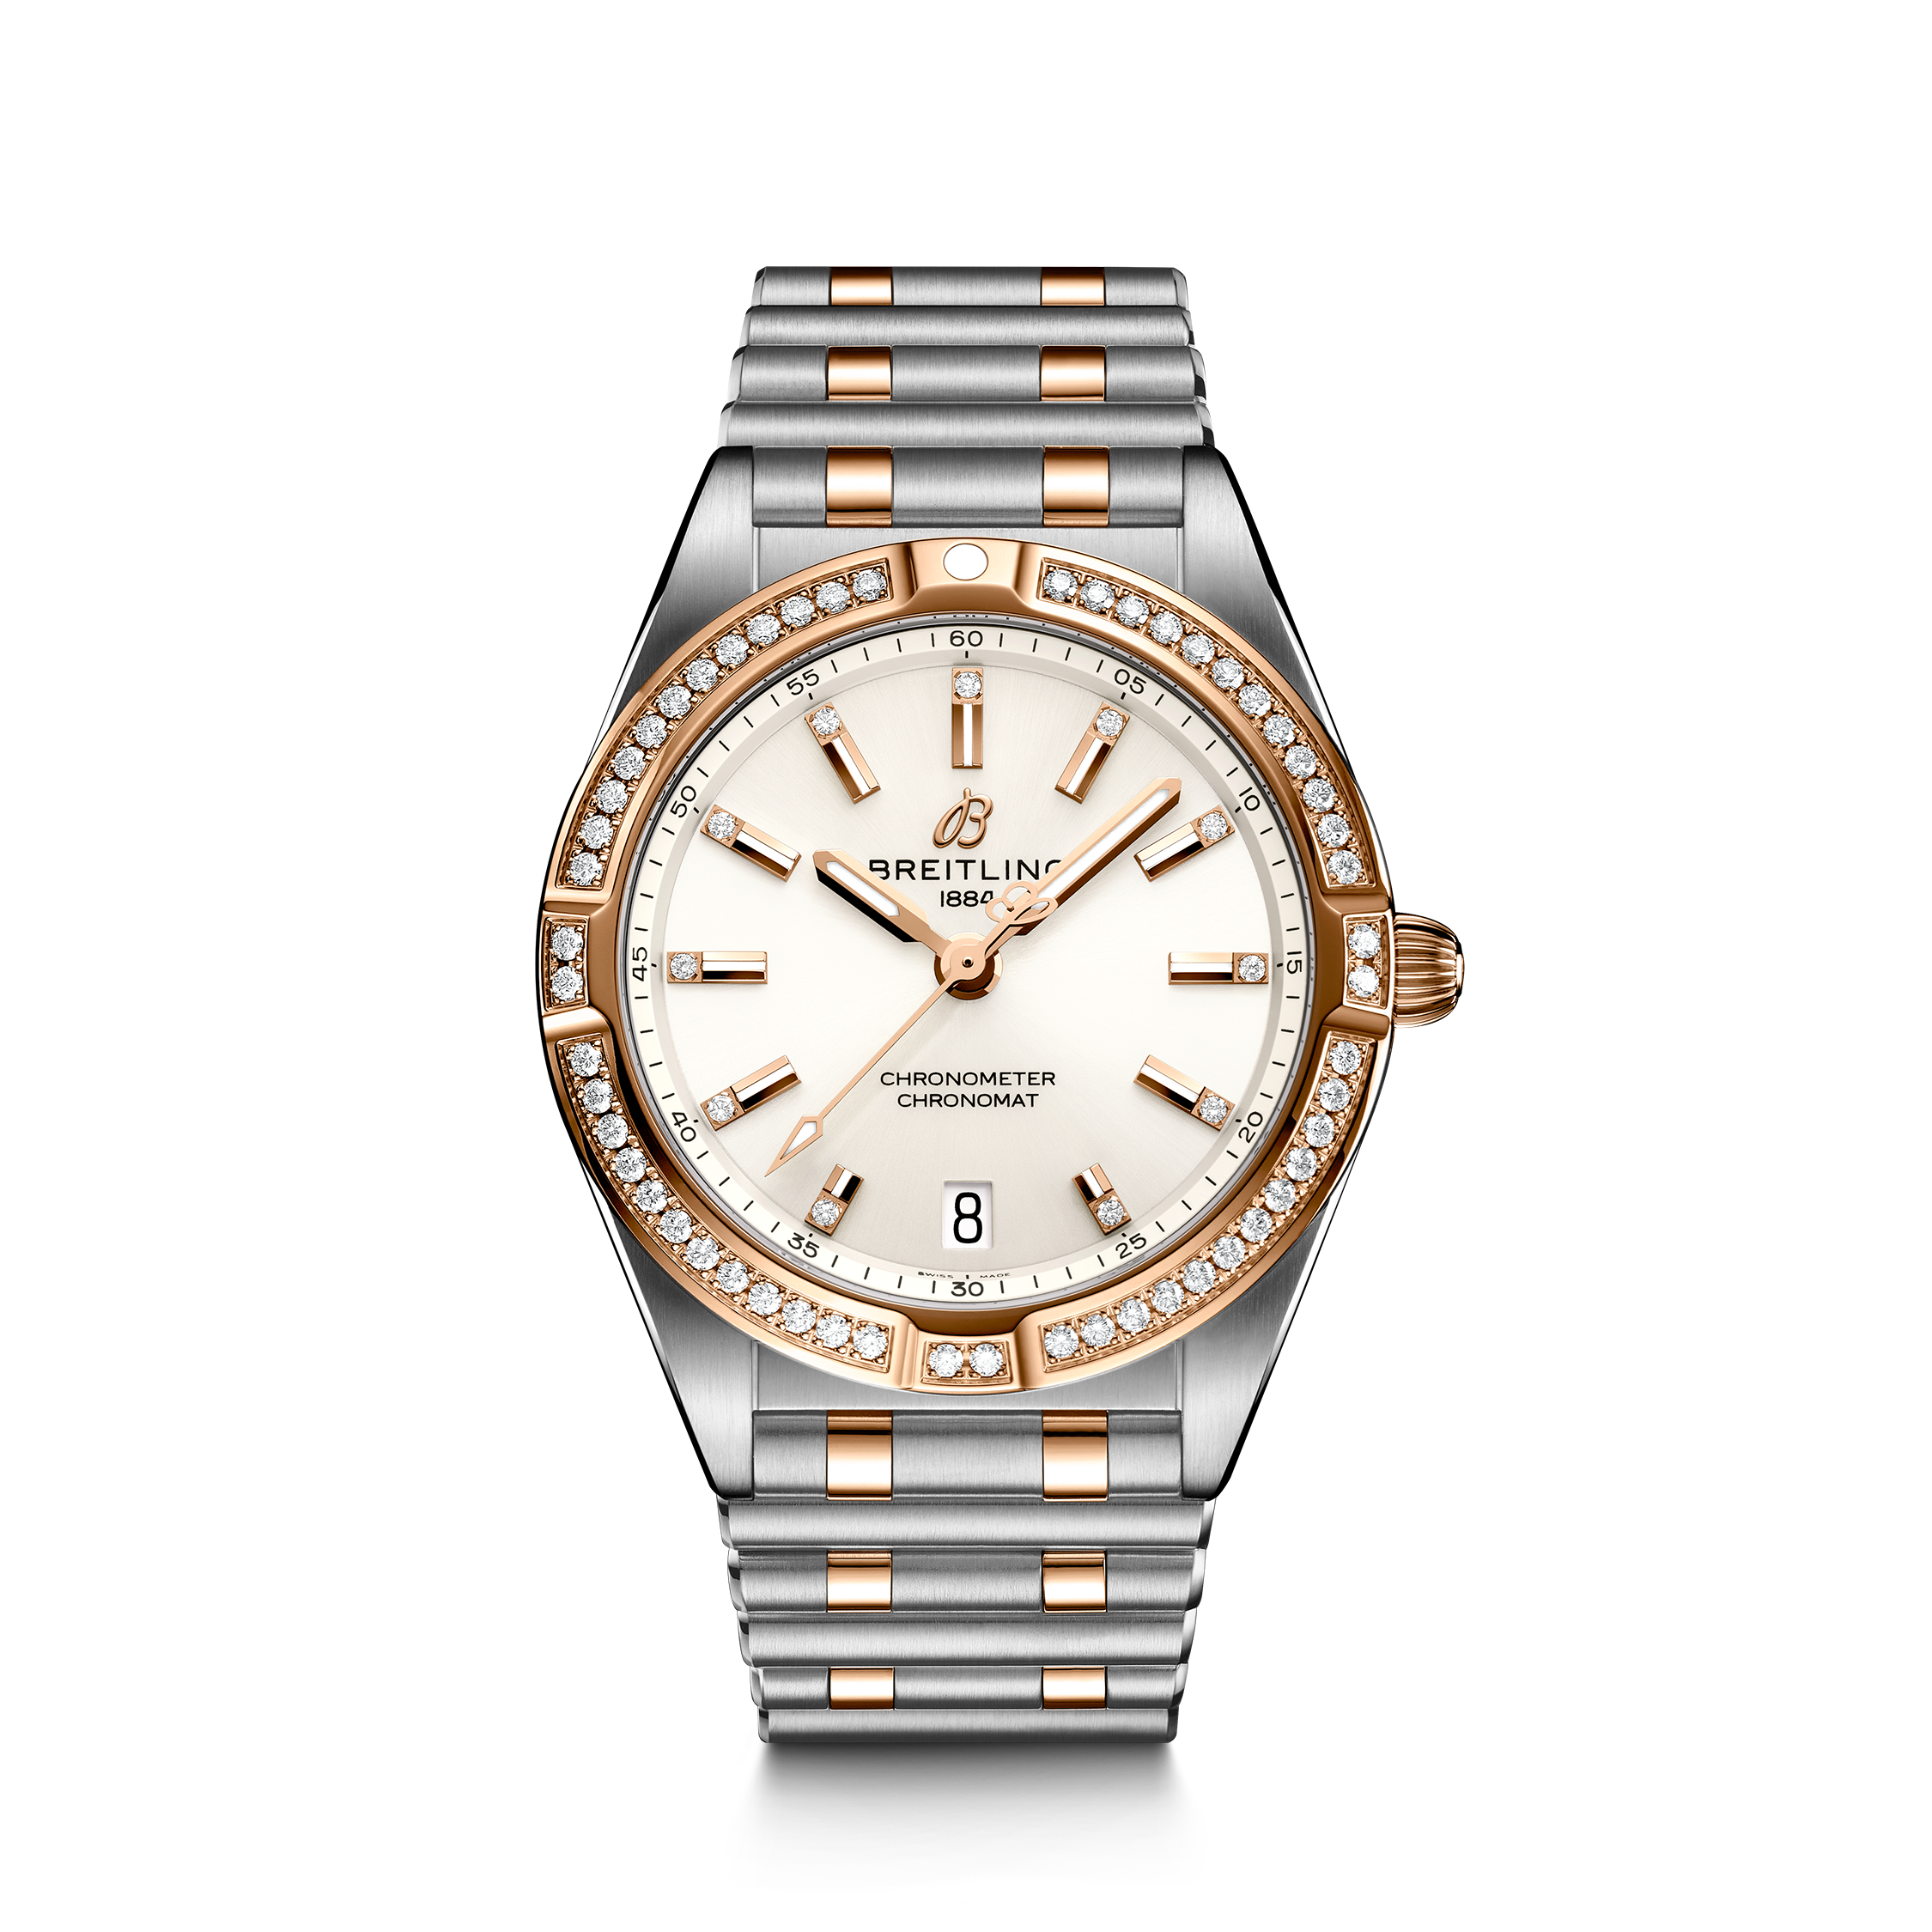 Breitling women's Chronomat 32MM stainless steel and 18K rose gold watch with diamond bezel.